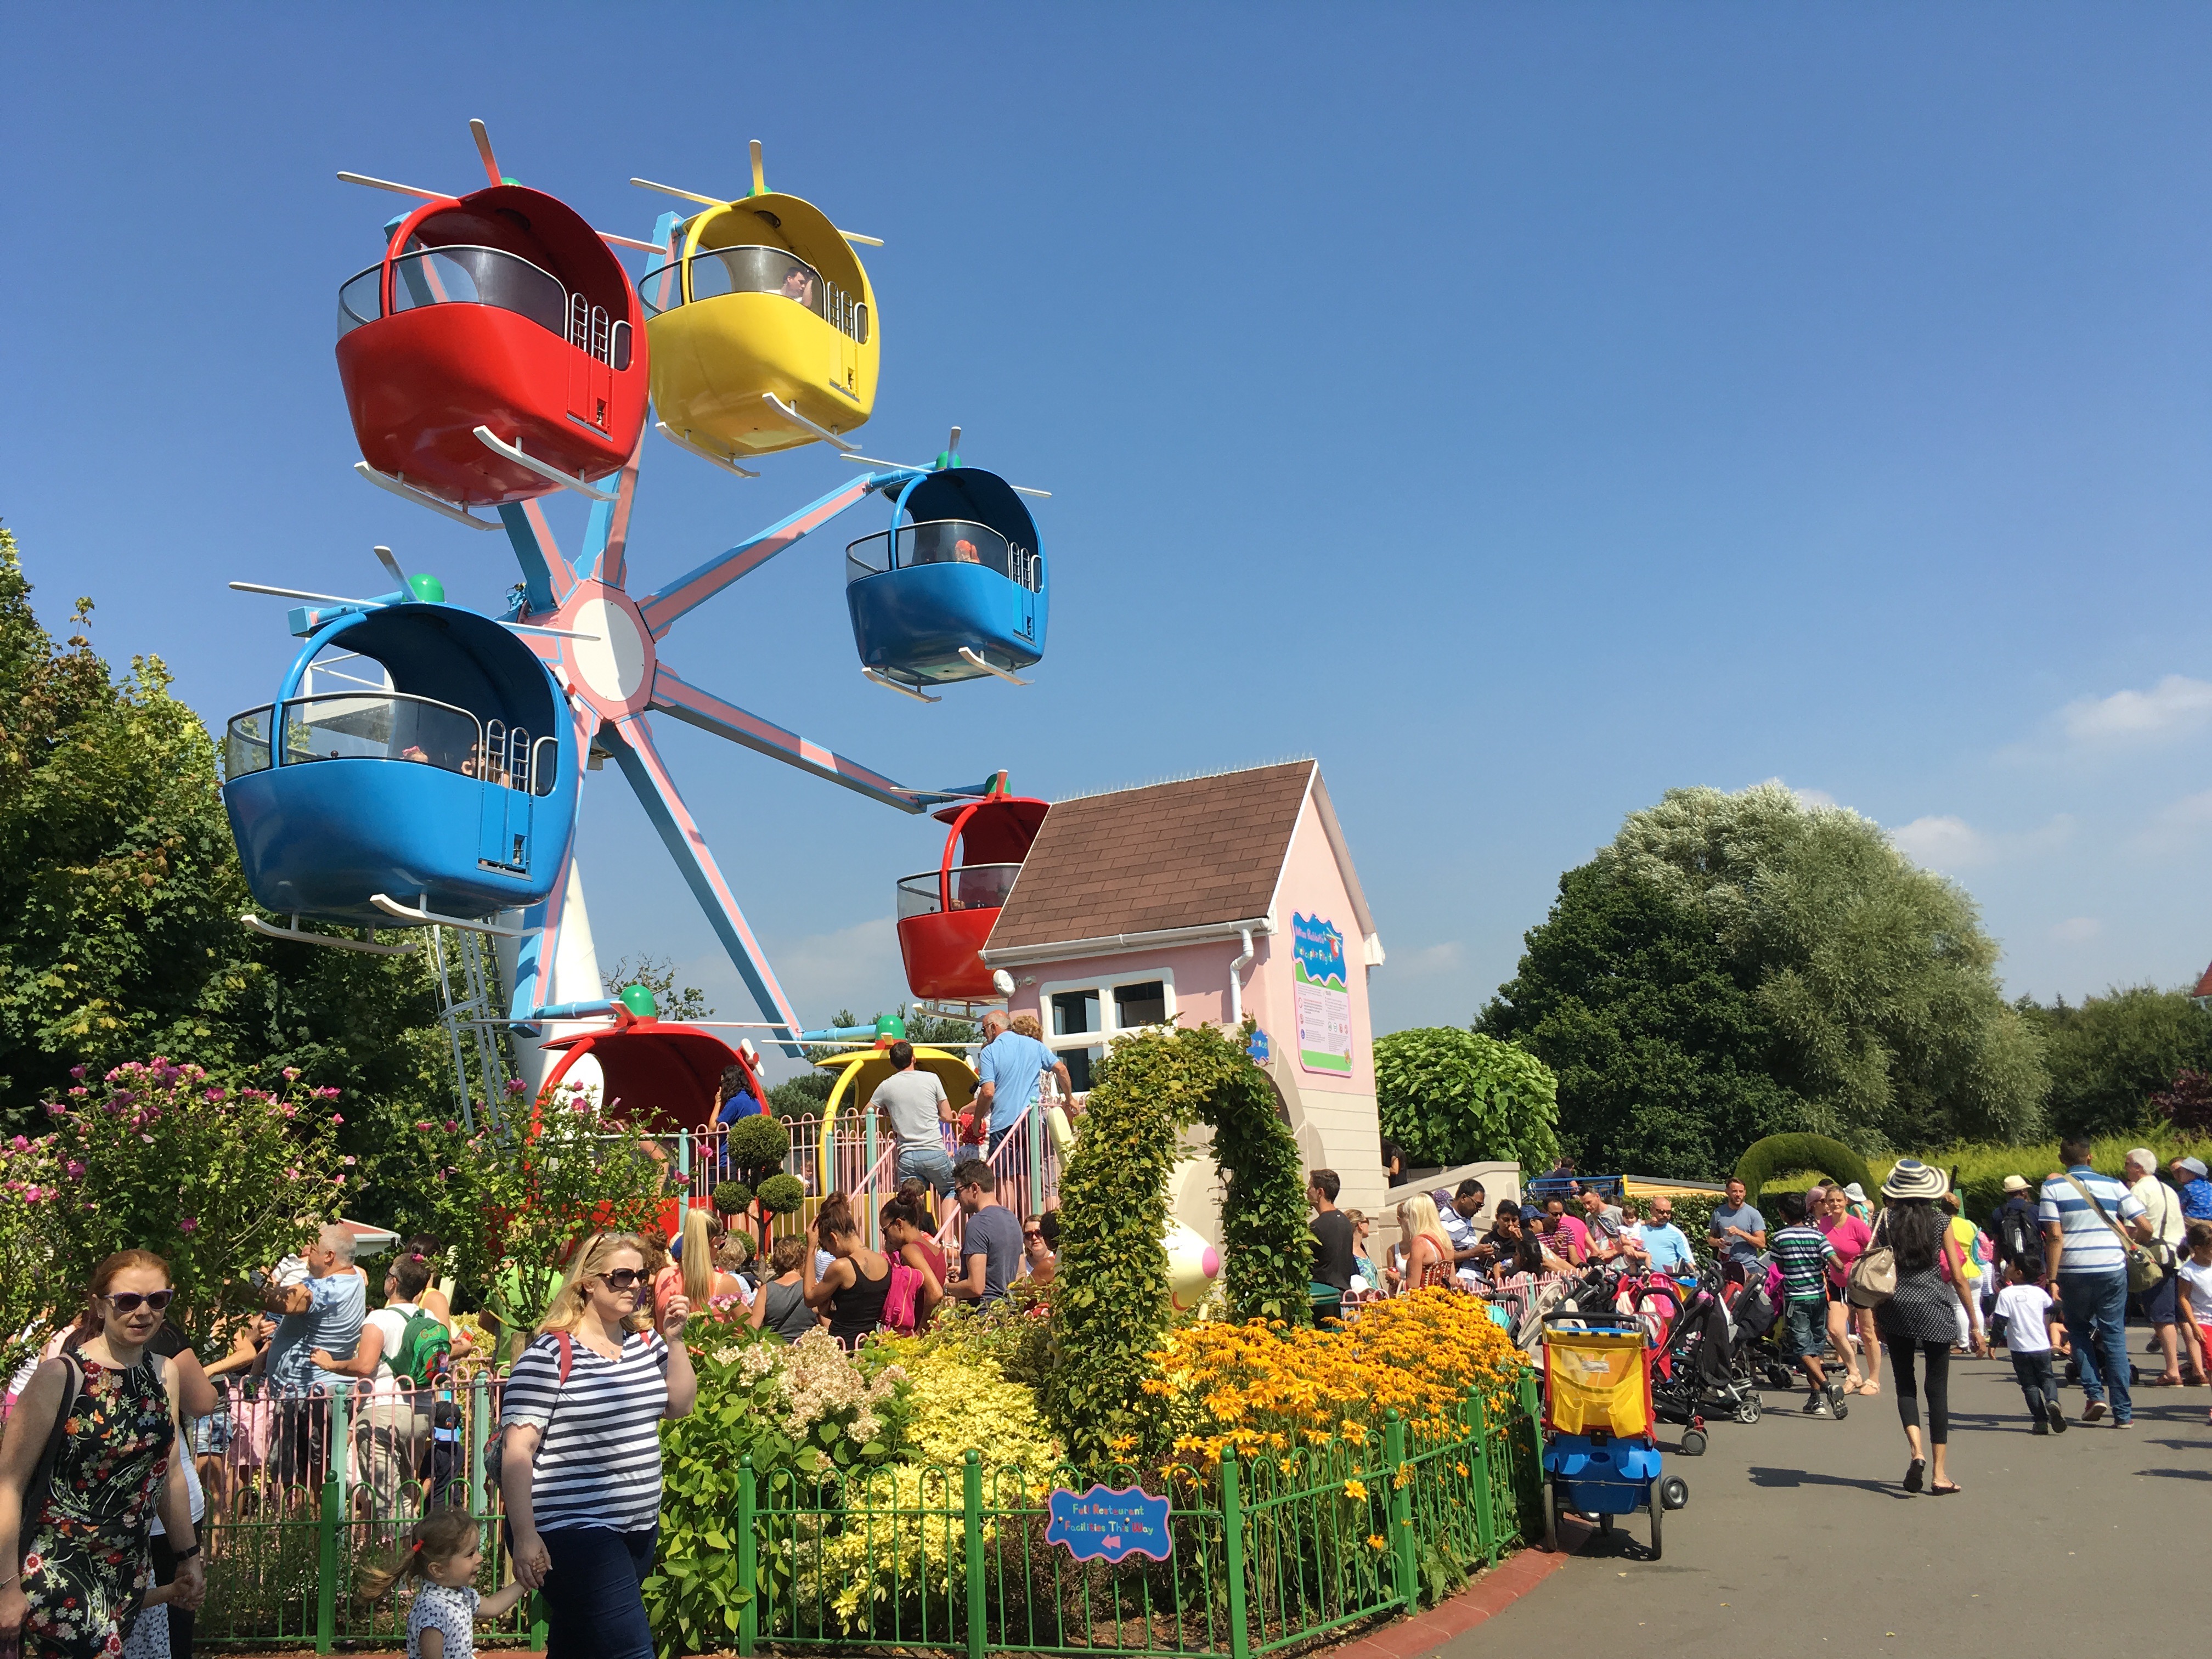 Miss Rabbit's Helicopter Flight at Peppa Pig World